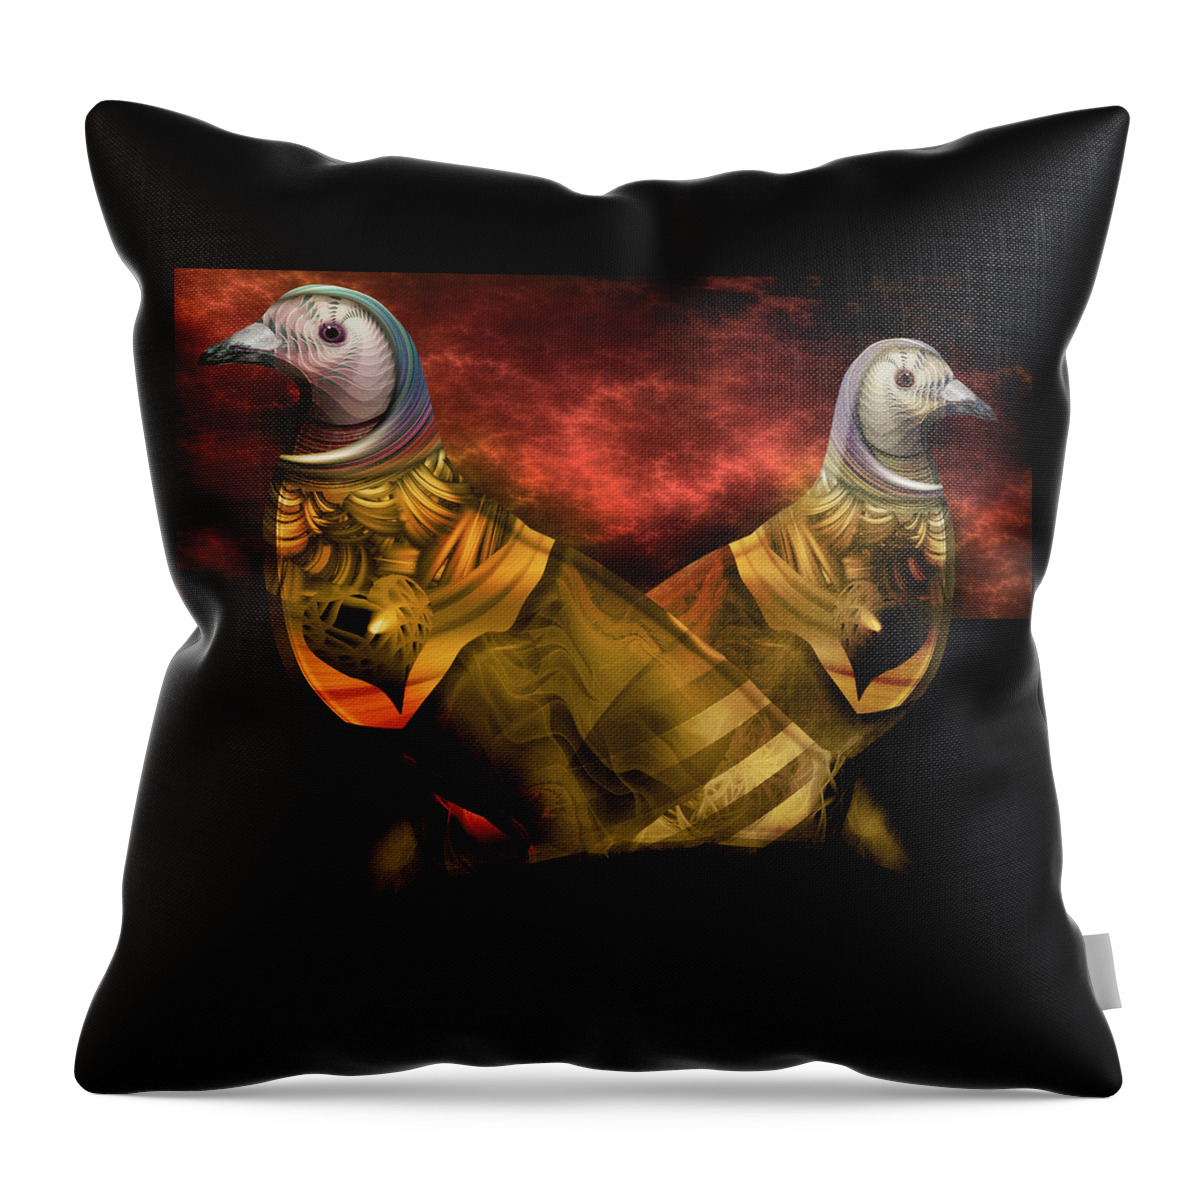 Digital Throw Pillow featuring the digital art Doomed Love by Andy Young